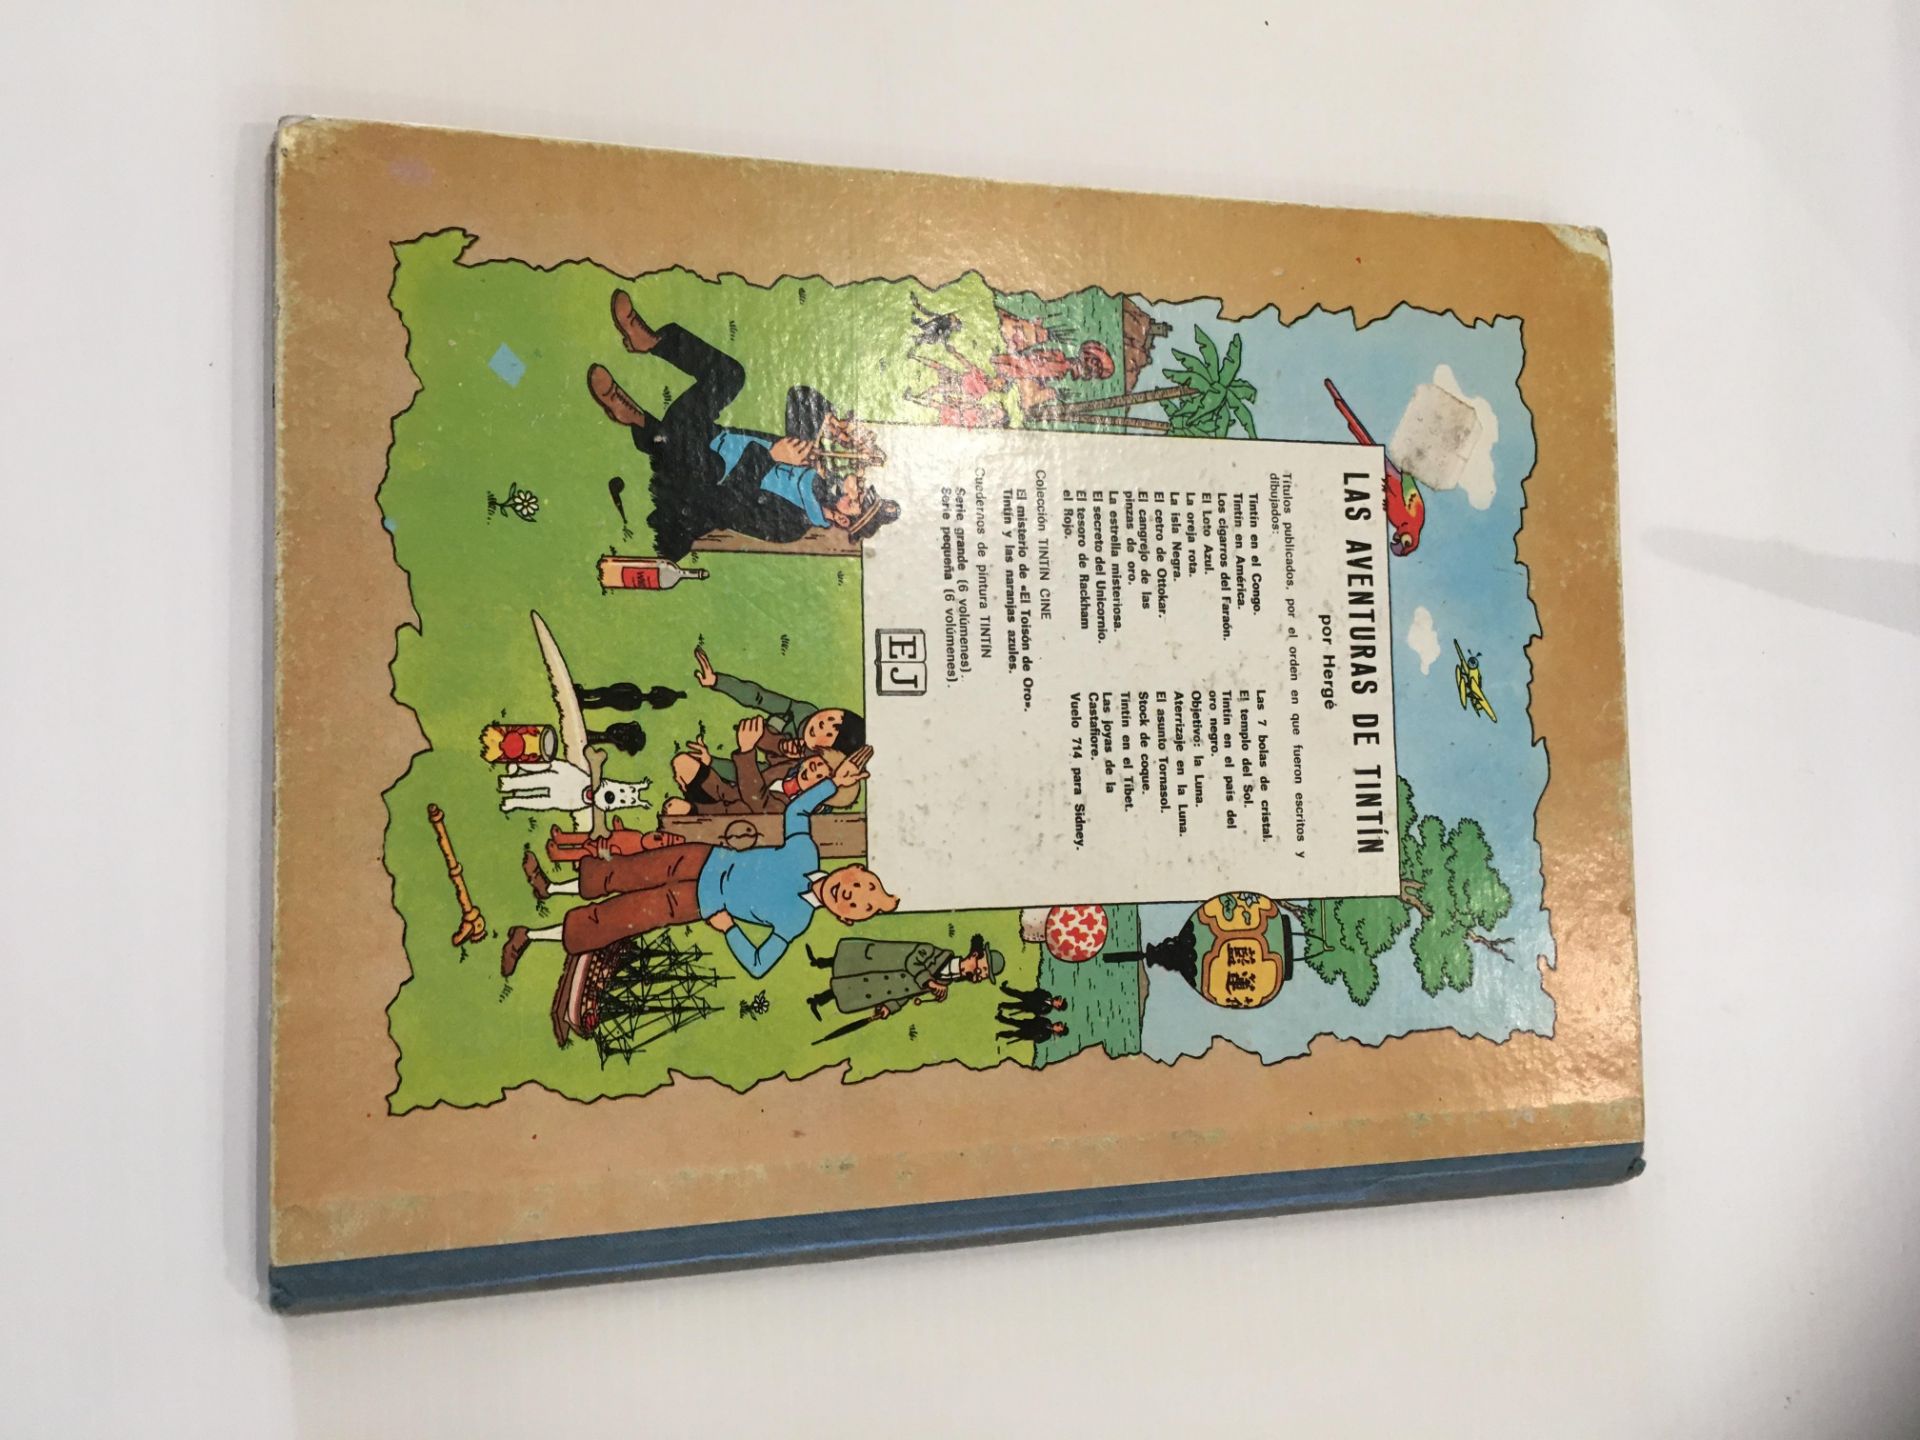 Contents to box 22 childrens books and annuals including a quantity of Herge Adventures of Tin Tin, - Image 5 of 14